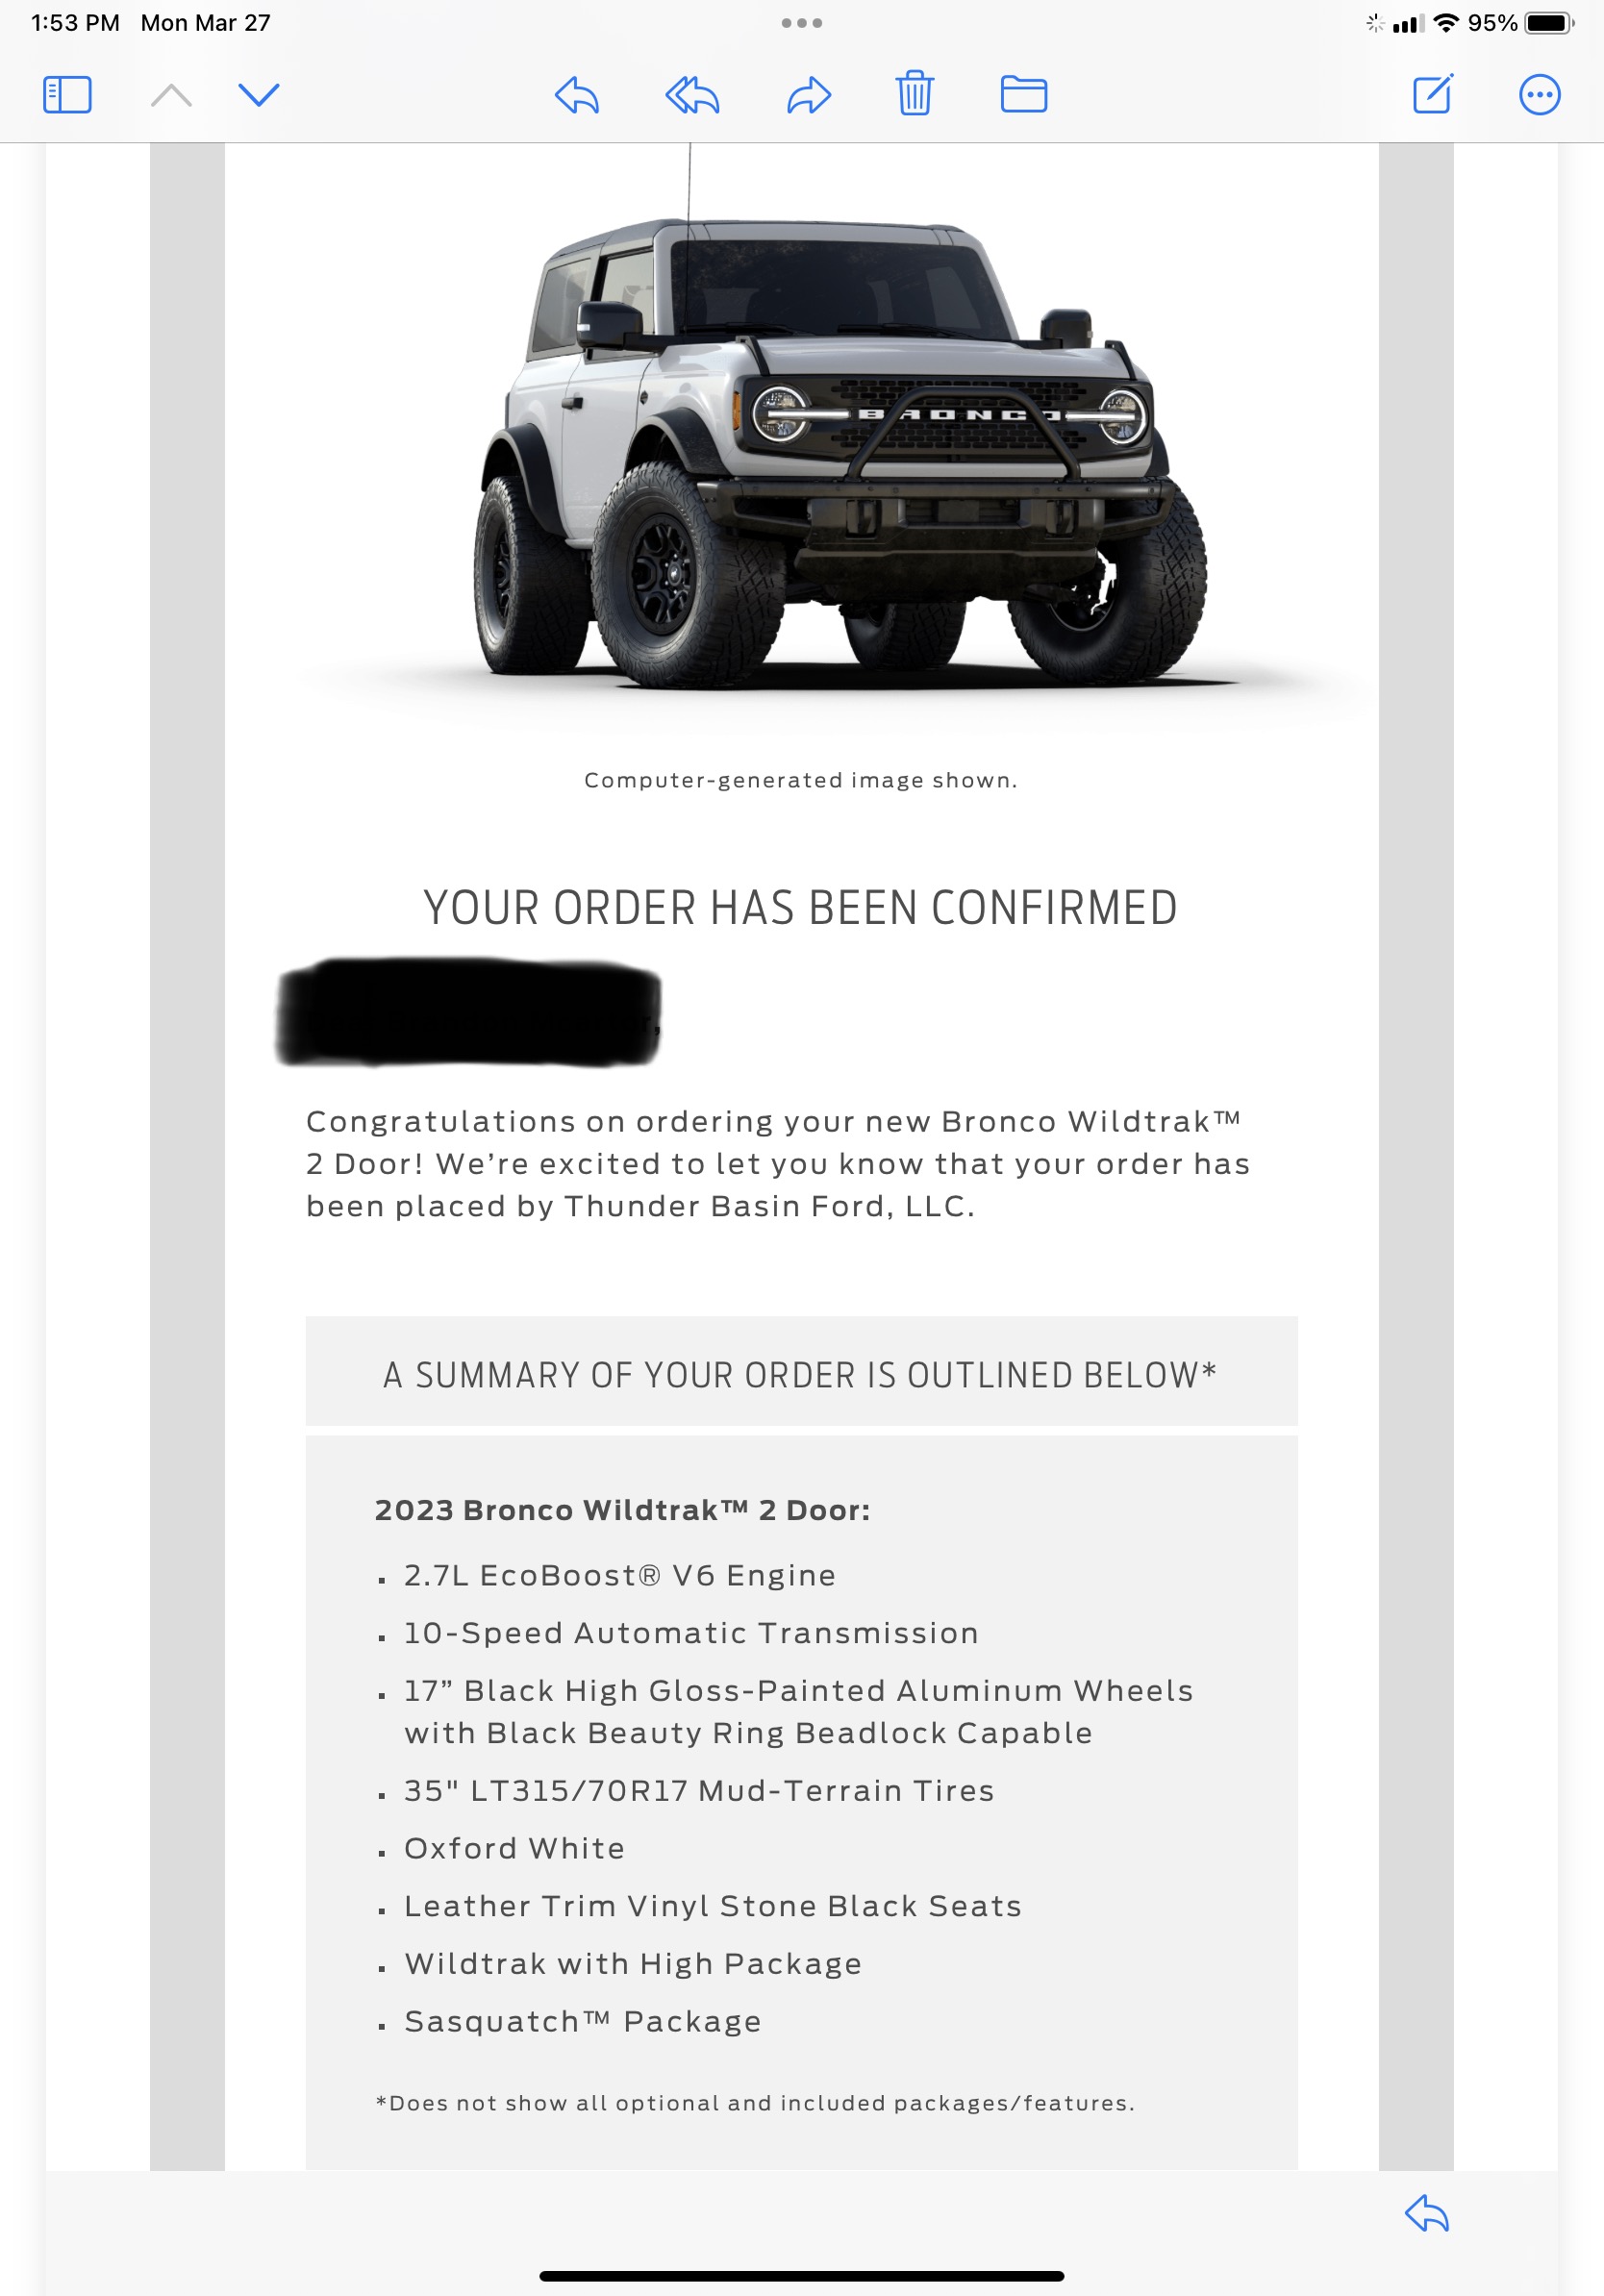 Ford Bronco Placed my 2023 Bronco Order! ... Post Yours! 5F8E9B71-A9E1-471B-934D-2004D39168DB